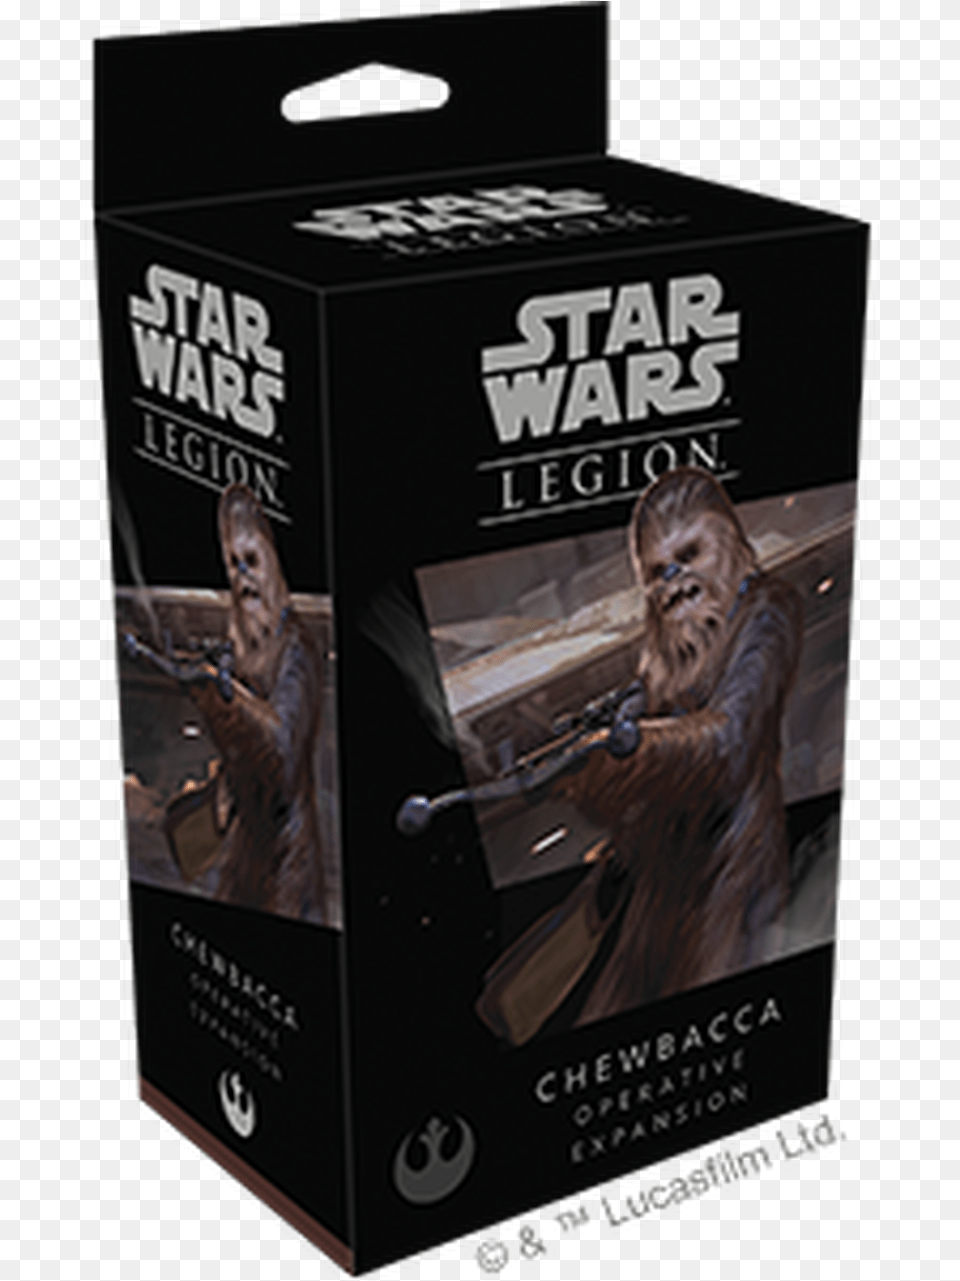 Chewbacca Operative Expansionclass Star Wars Legion Chewbacca, Person, Adult, Male, Man Png Image